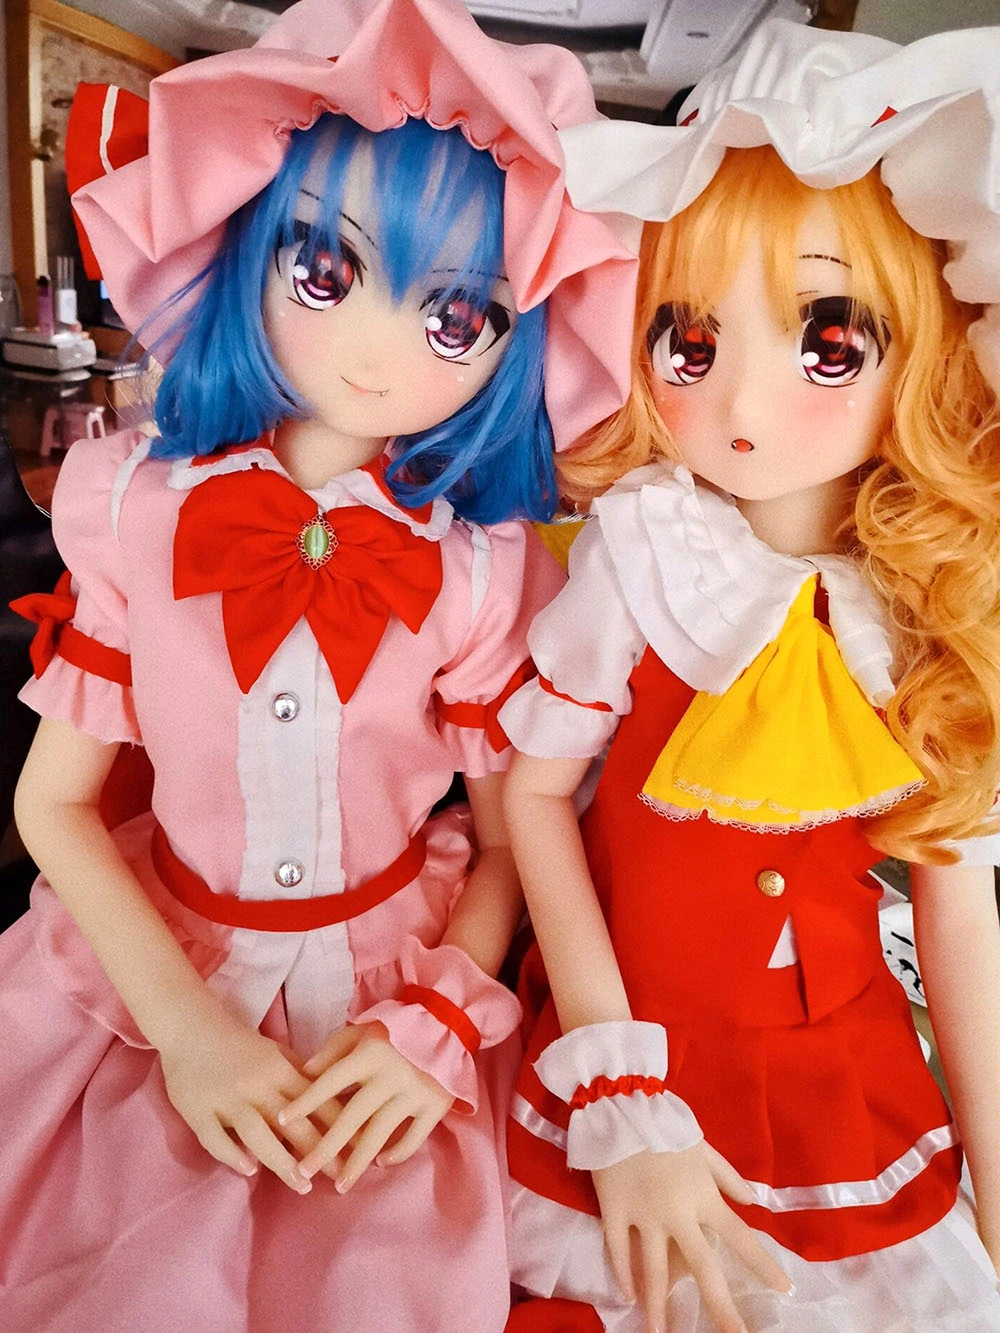 real life slender flandre scarlet anime sex doll from touhou made of high quality TPE material with big breasts